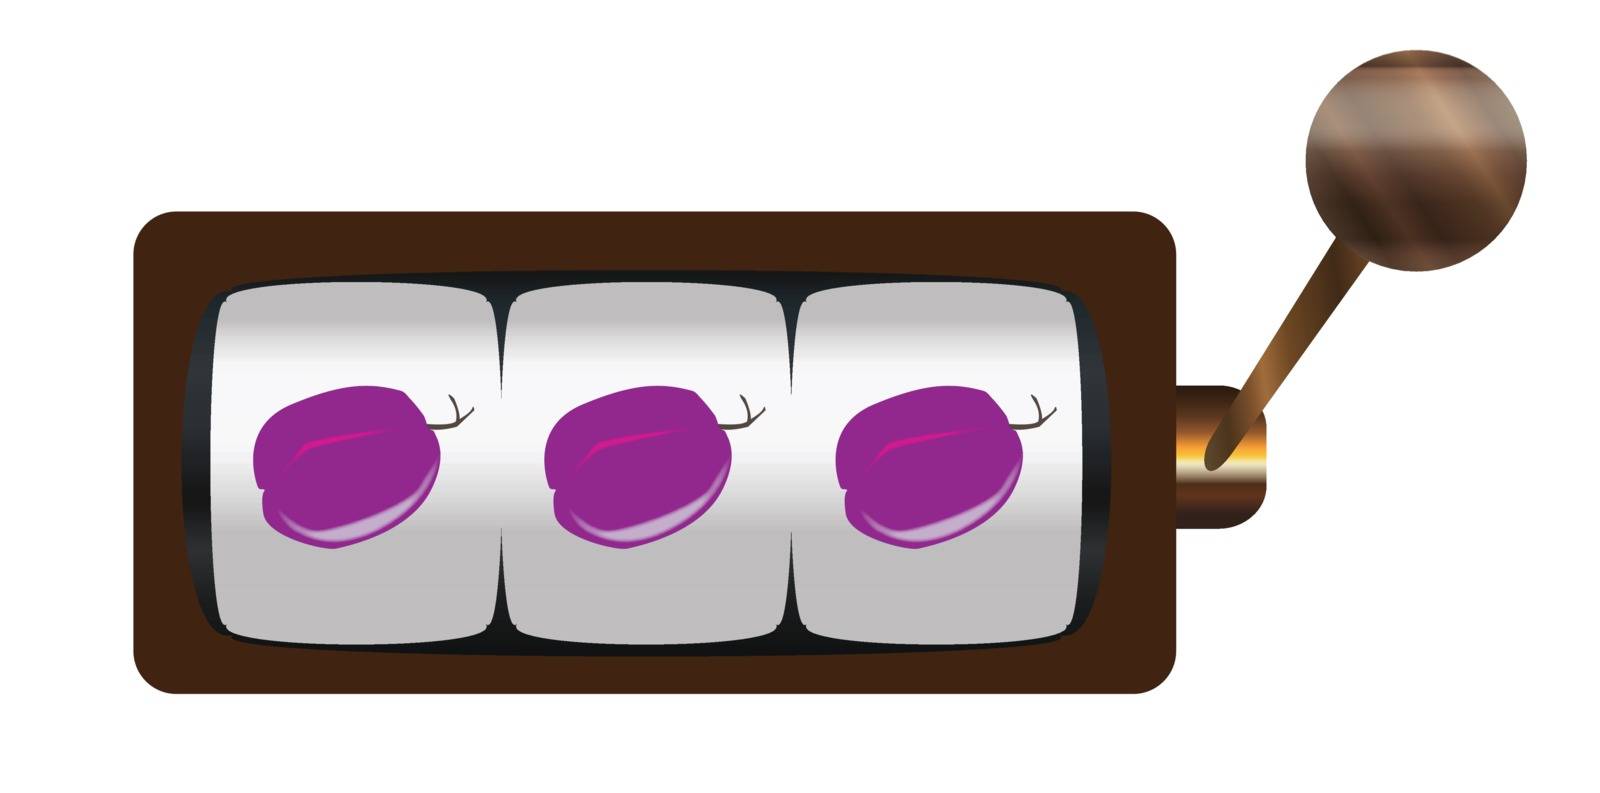 A typical cartoon style three plum on a spin of a one armed bandit or fruit machine over a white background